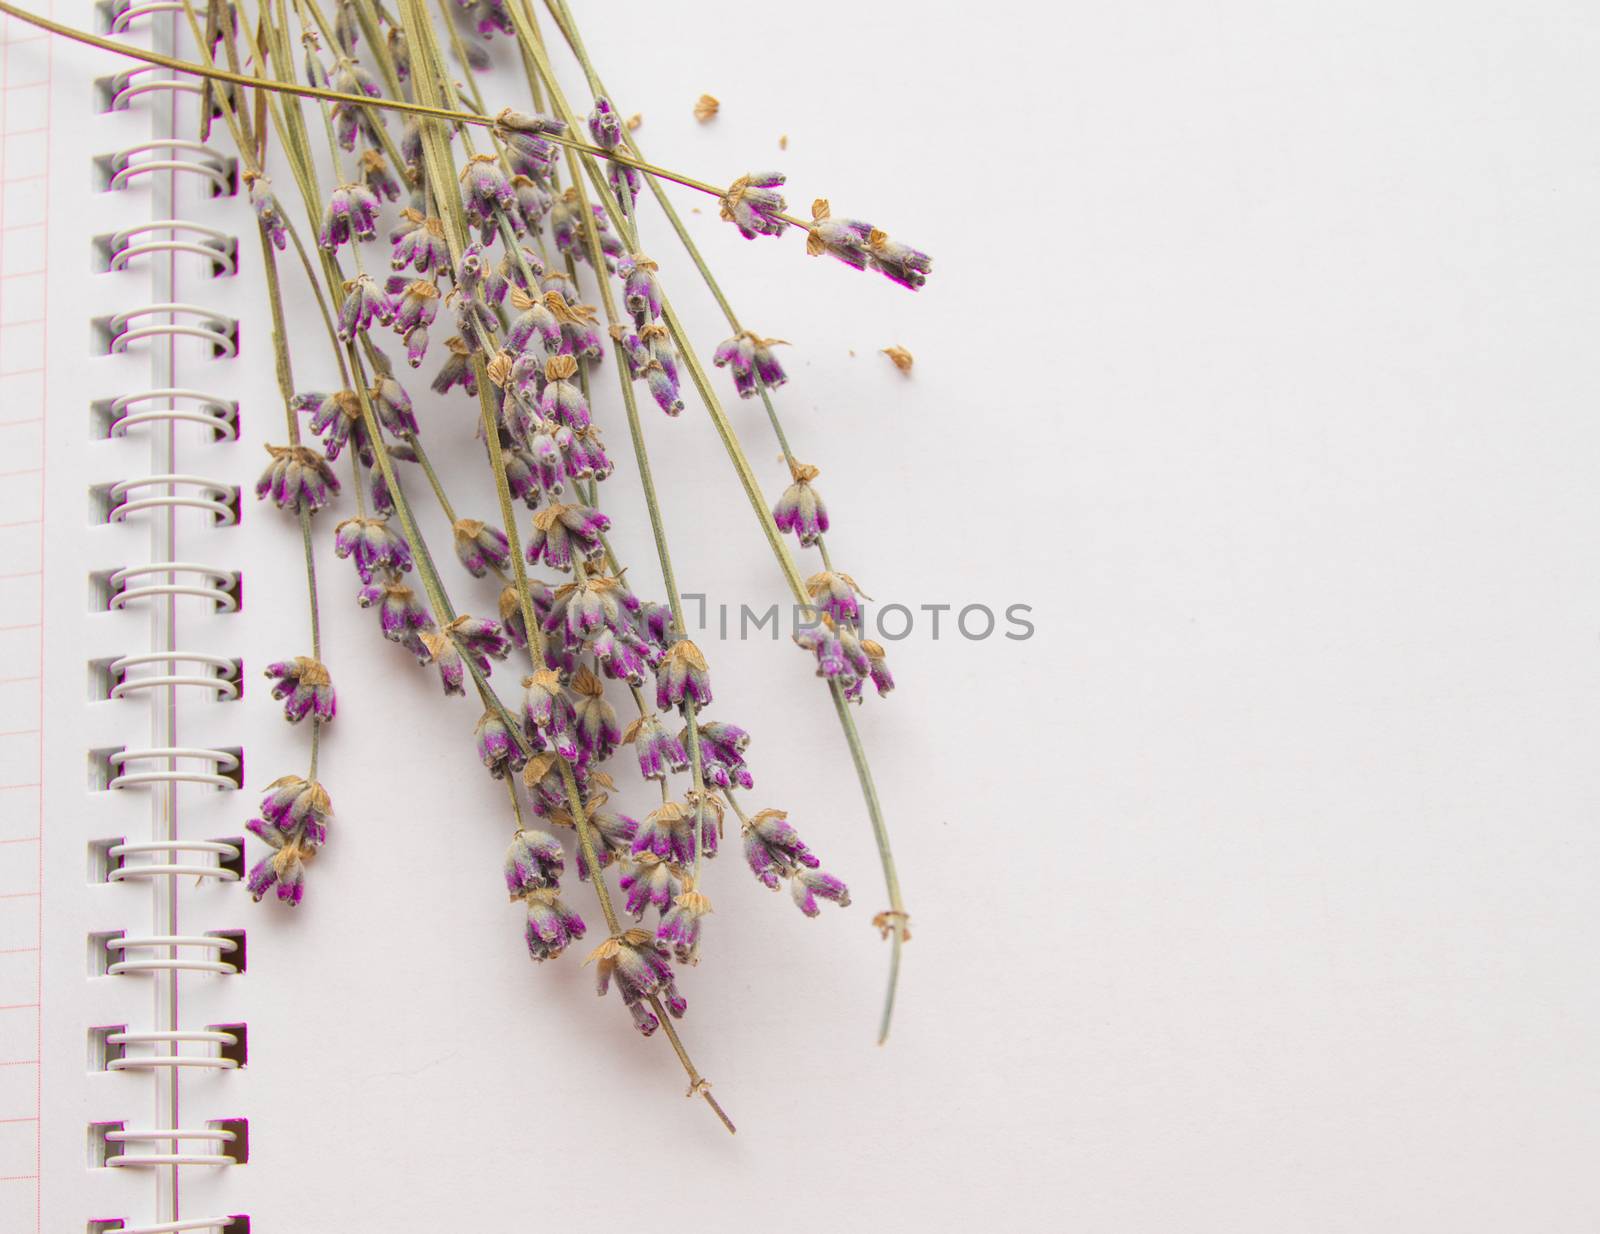 Lavender flowers lying on an open notebook, CONCEPT FLAT LAY, TOP VIEW closeup.